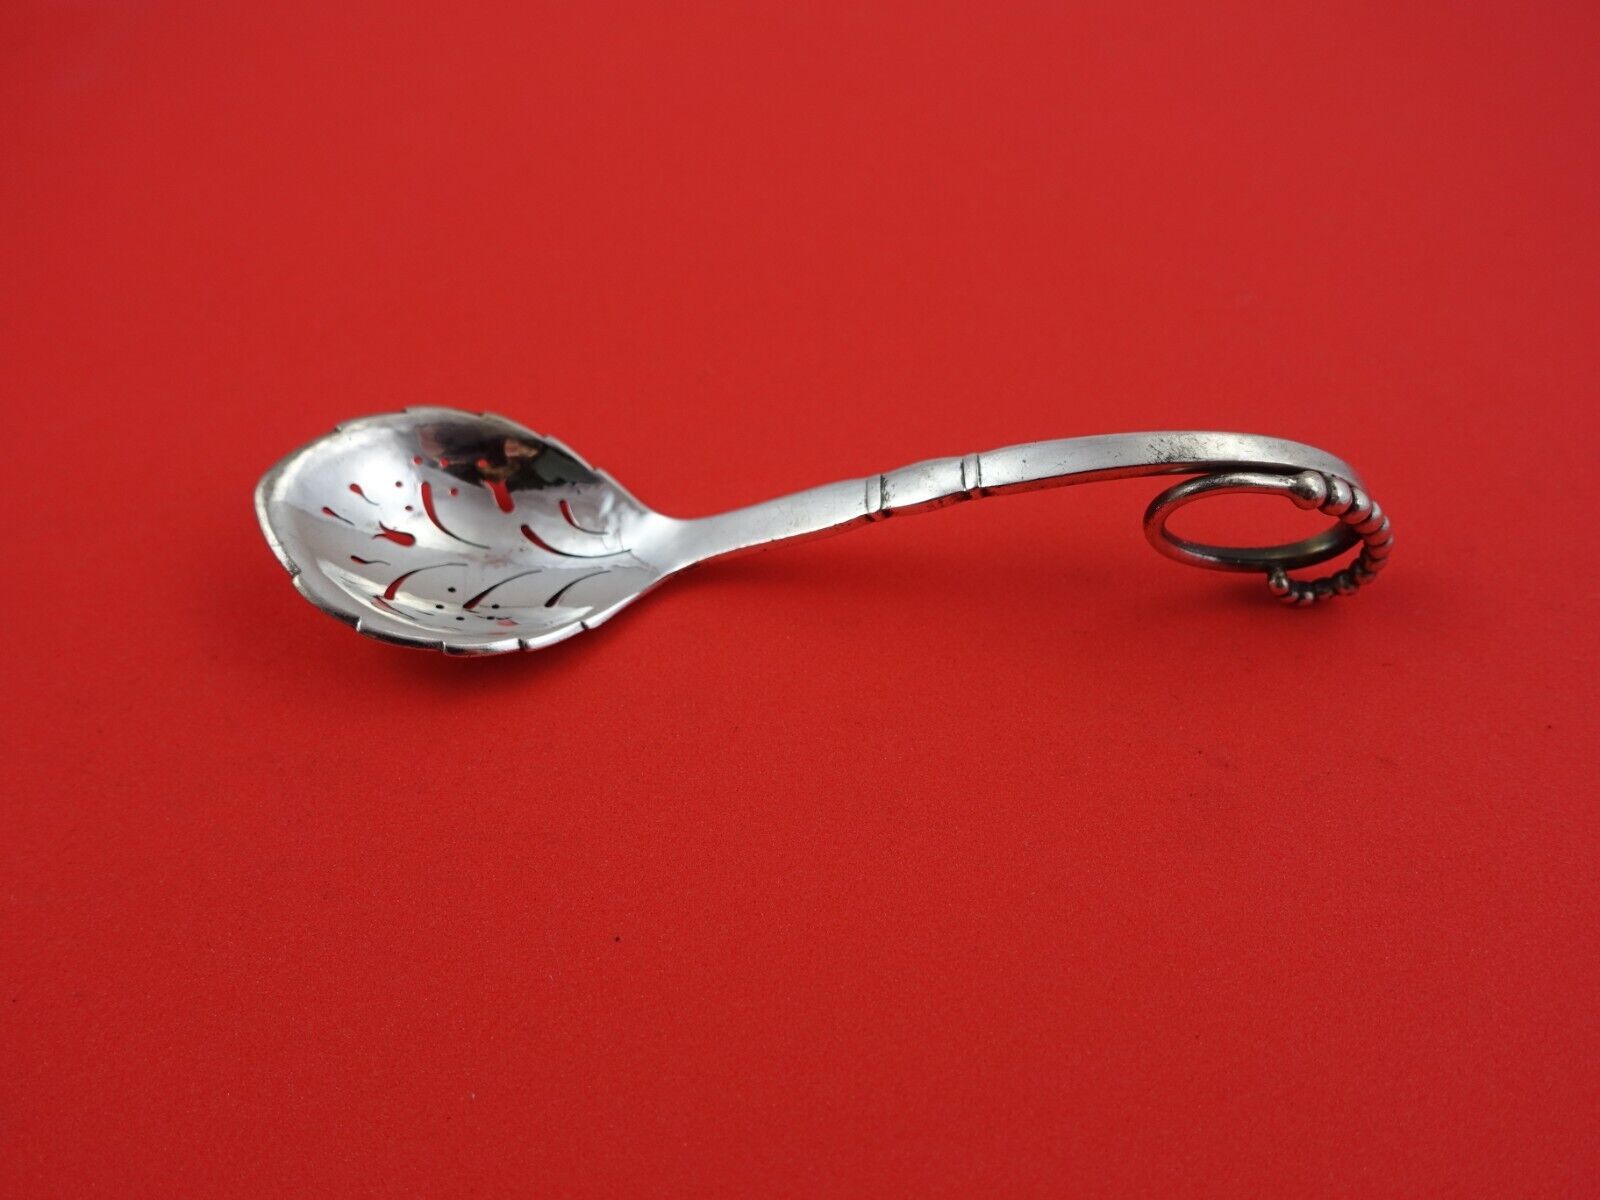 Primary image for Ornamental #41 By Georg Jensen Sterling Silver Sugar Sifter Ladle 5 1/2" Serving